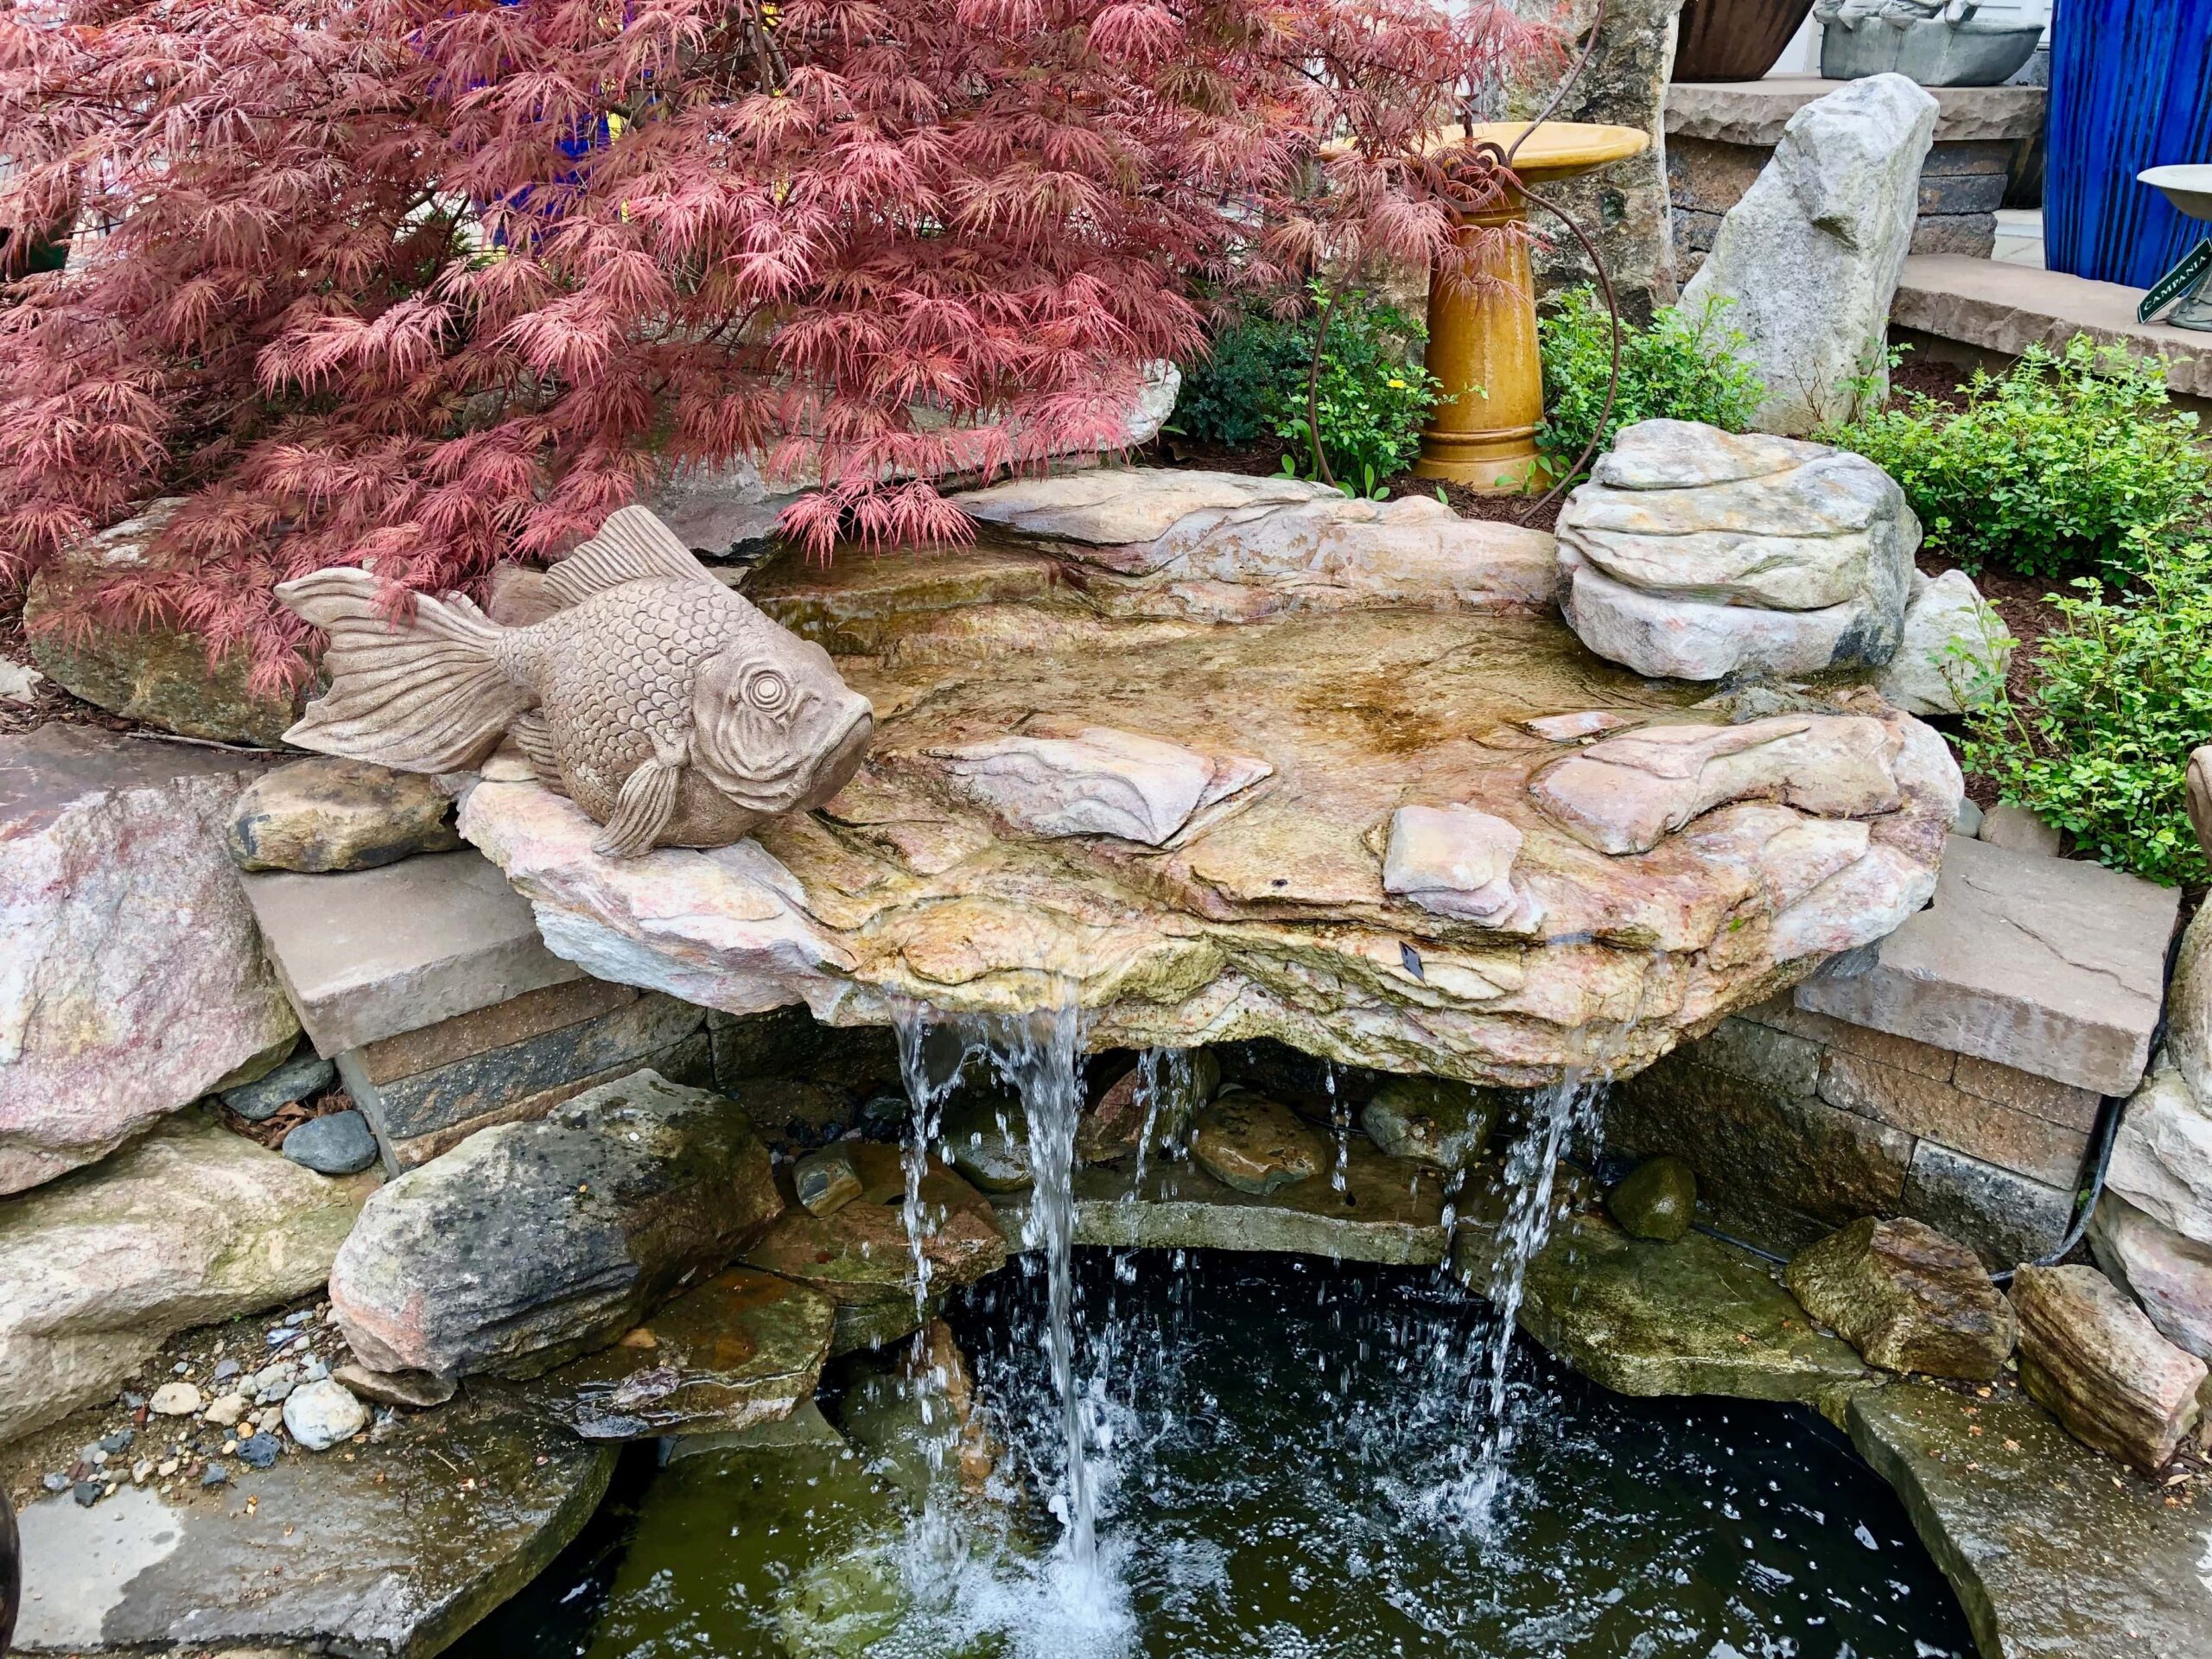 Landscaped backyard water feature with integrated water features, providing a serene setting for outdoor design